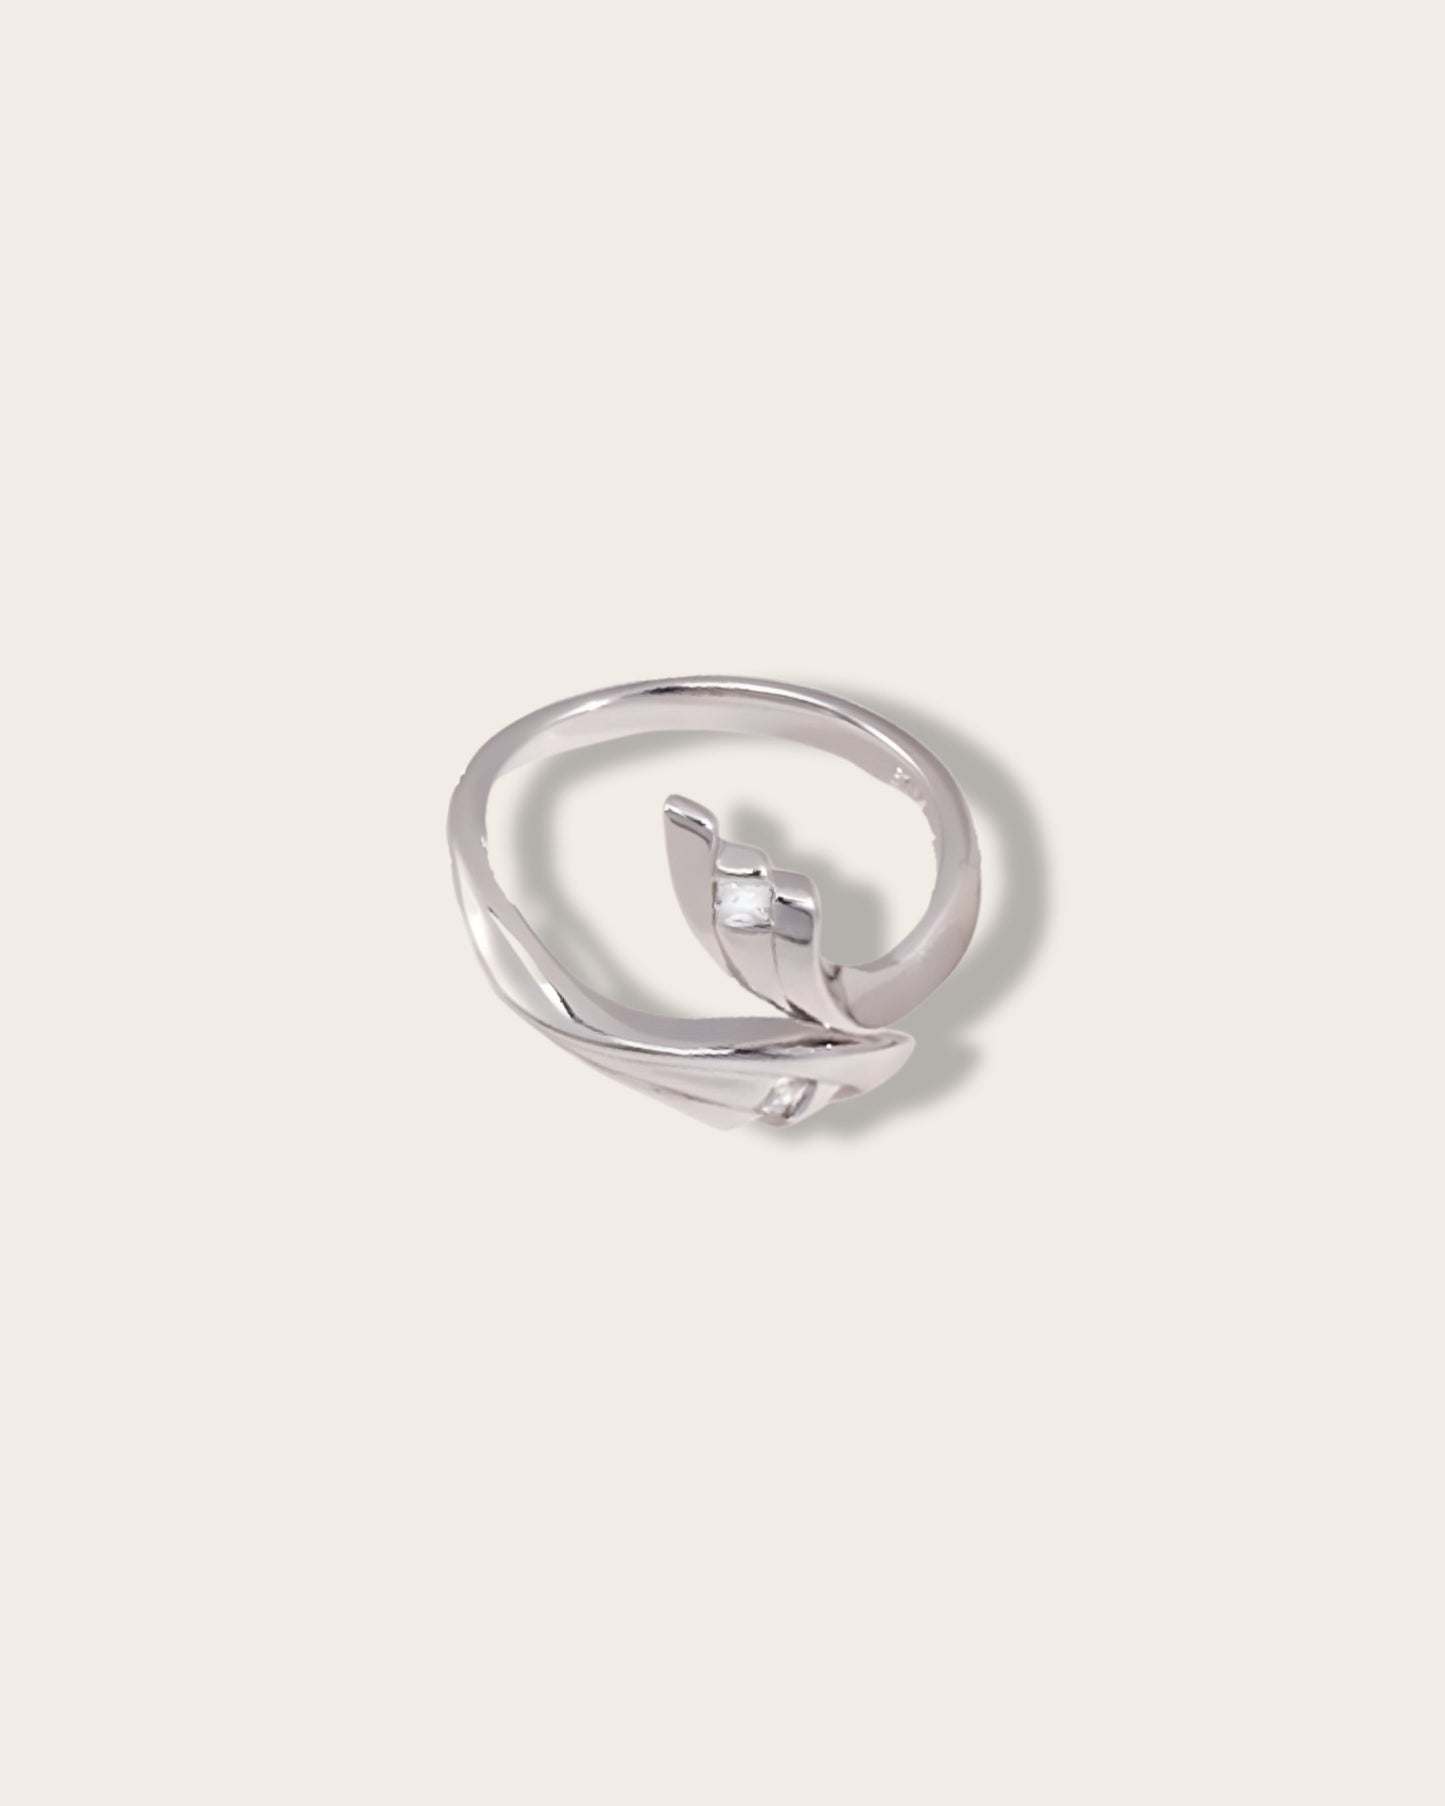  Interwoven Elegance Ring - Zircon Gold and Silver Ring - S925 Sterling Silver with 18K Gold Vermeil  Ring - a symbol of grace and ethereal beauty